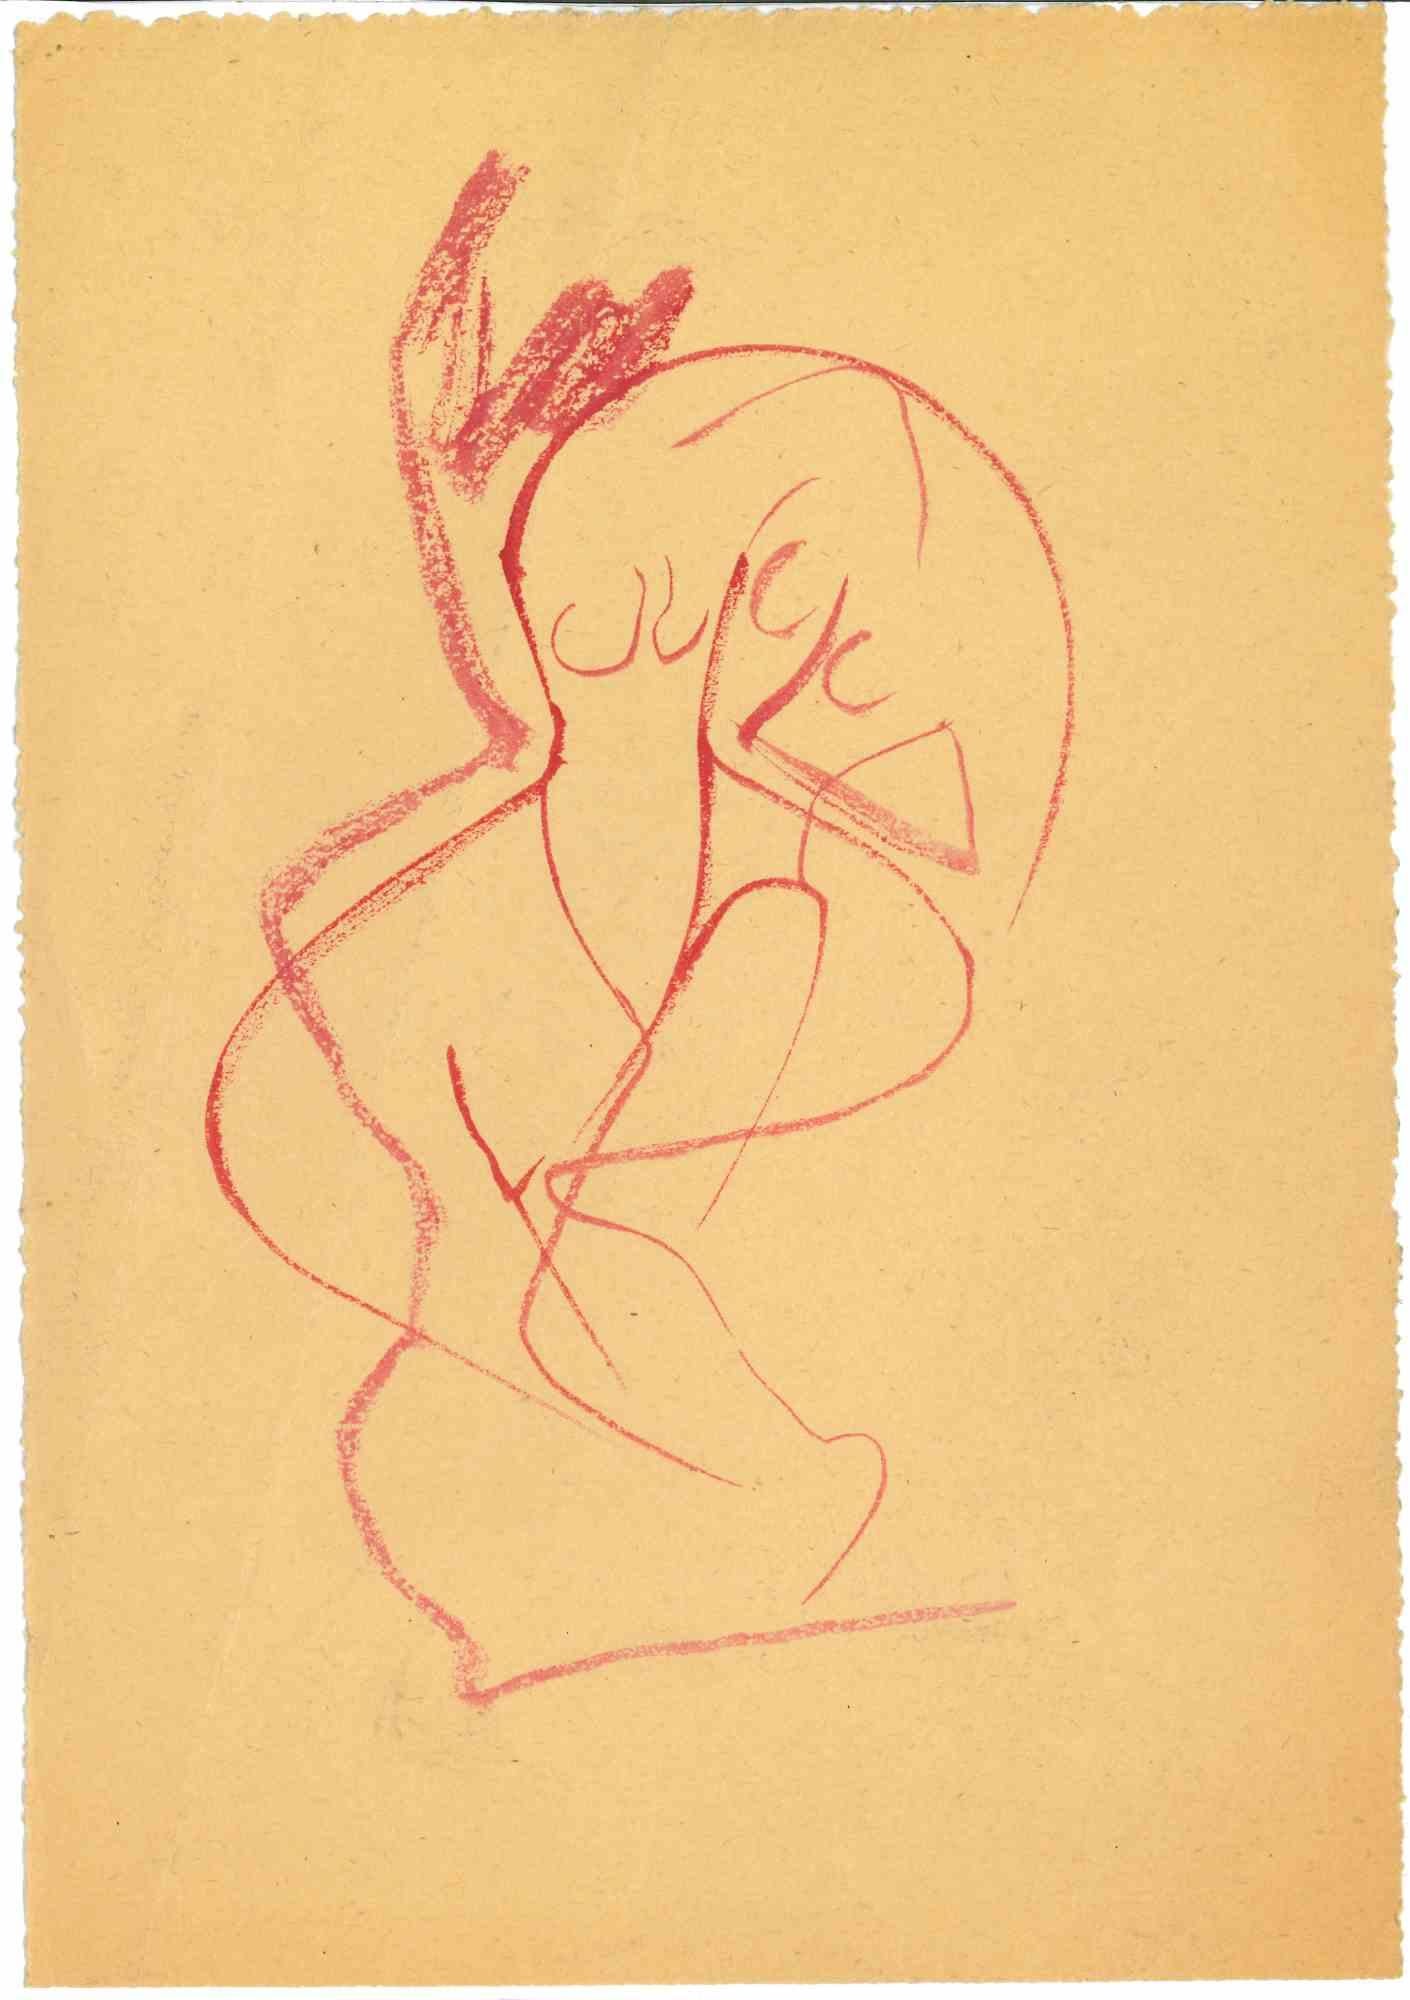 Composition - Drawing by Mino Maccari - Mid-20th Century